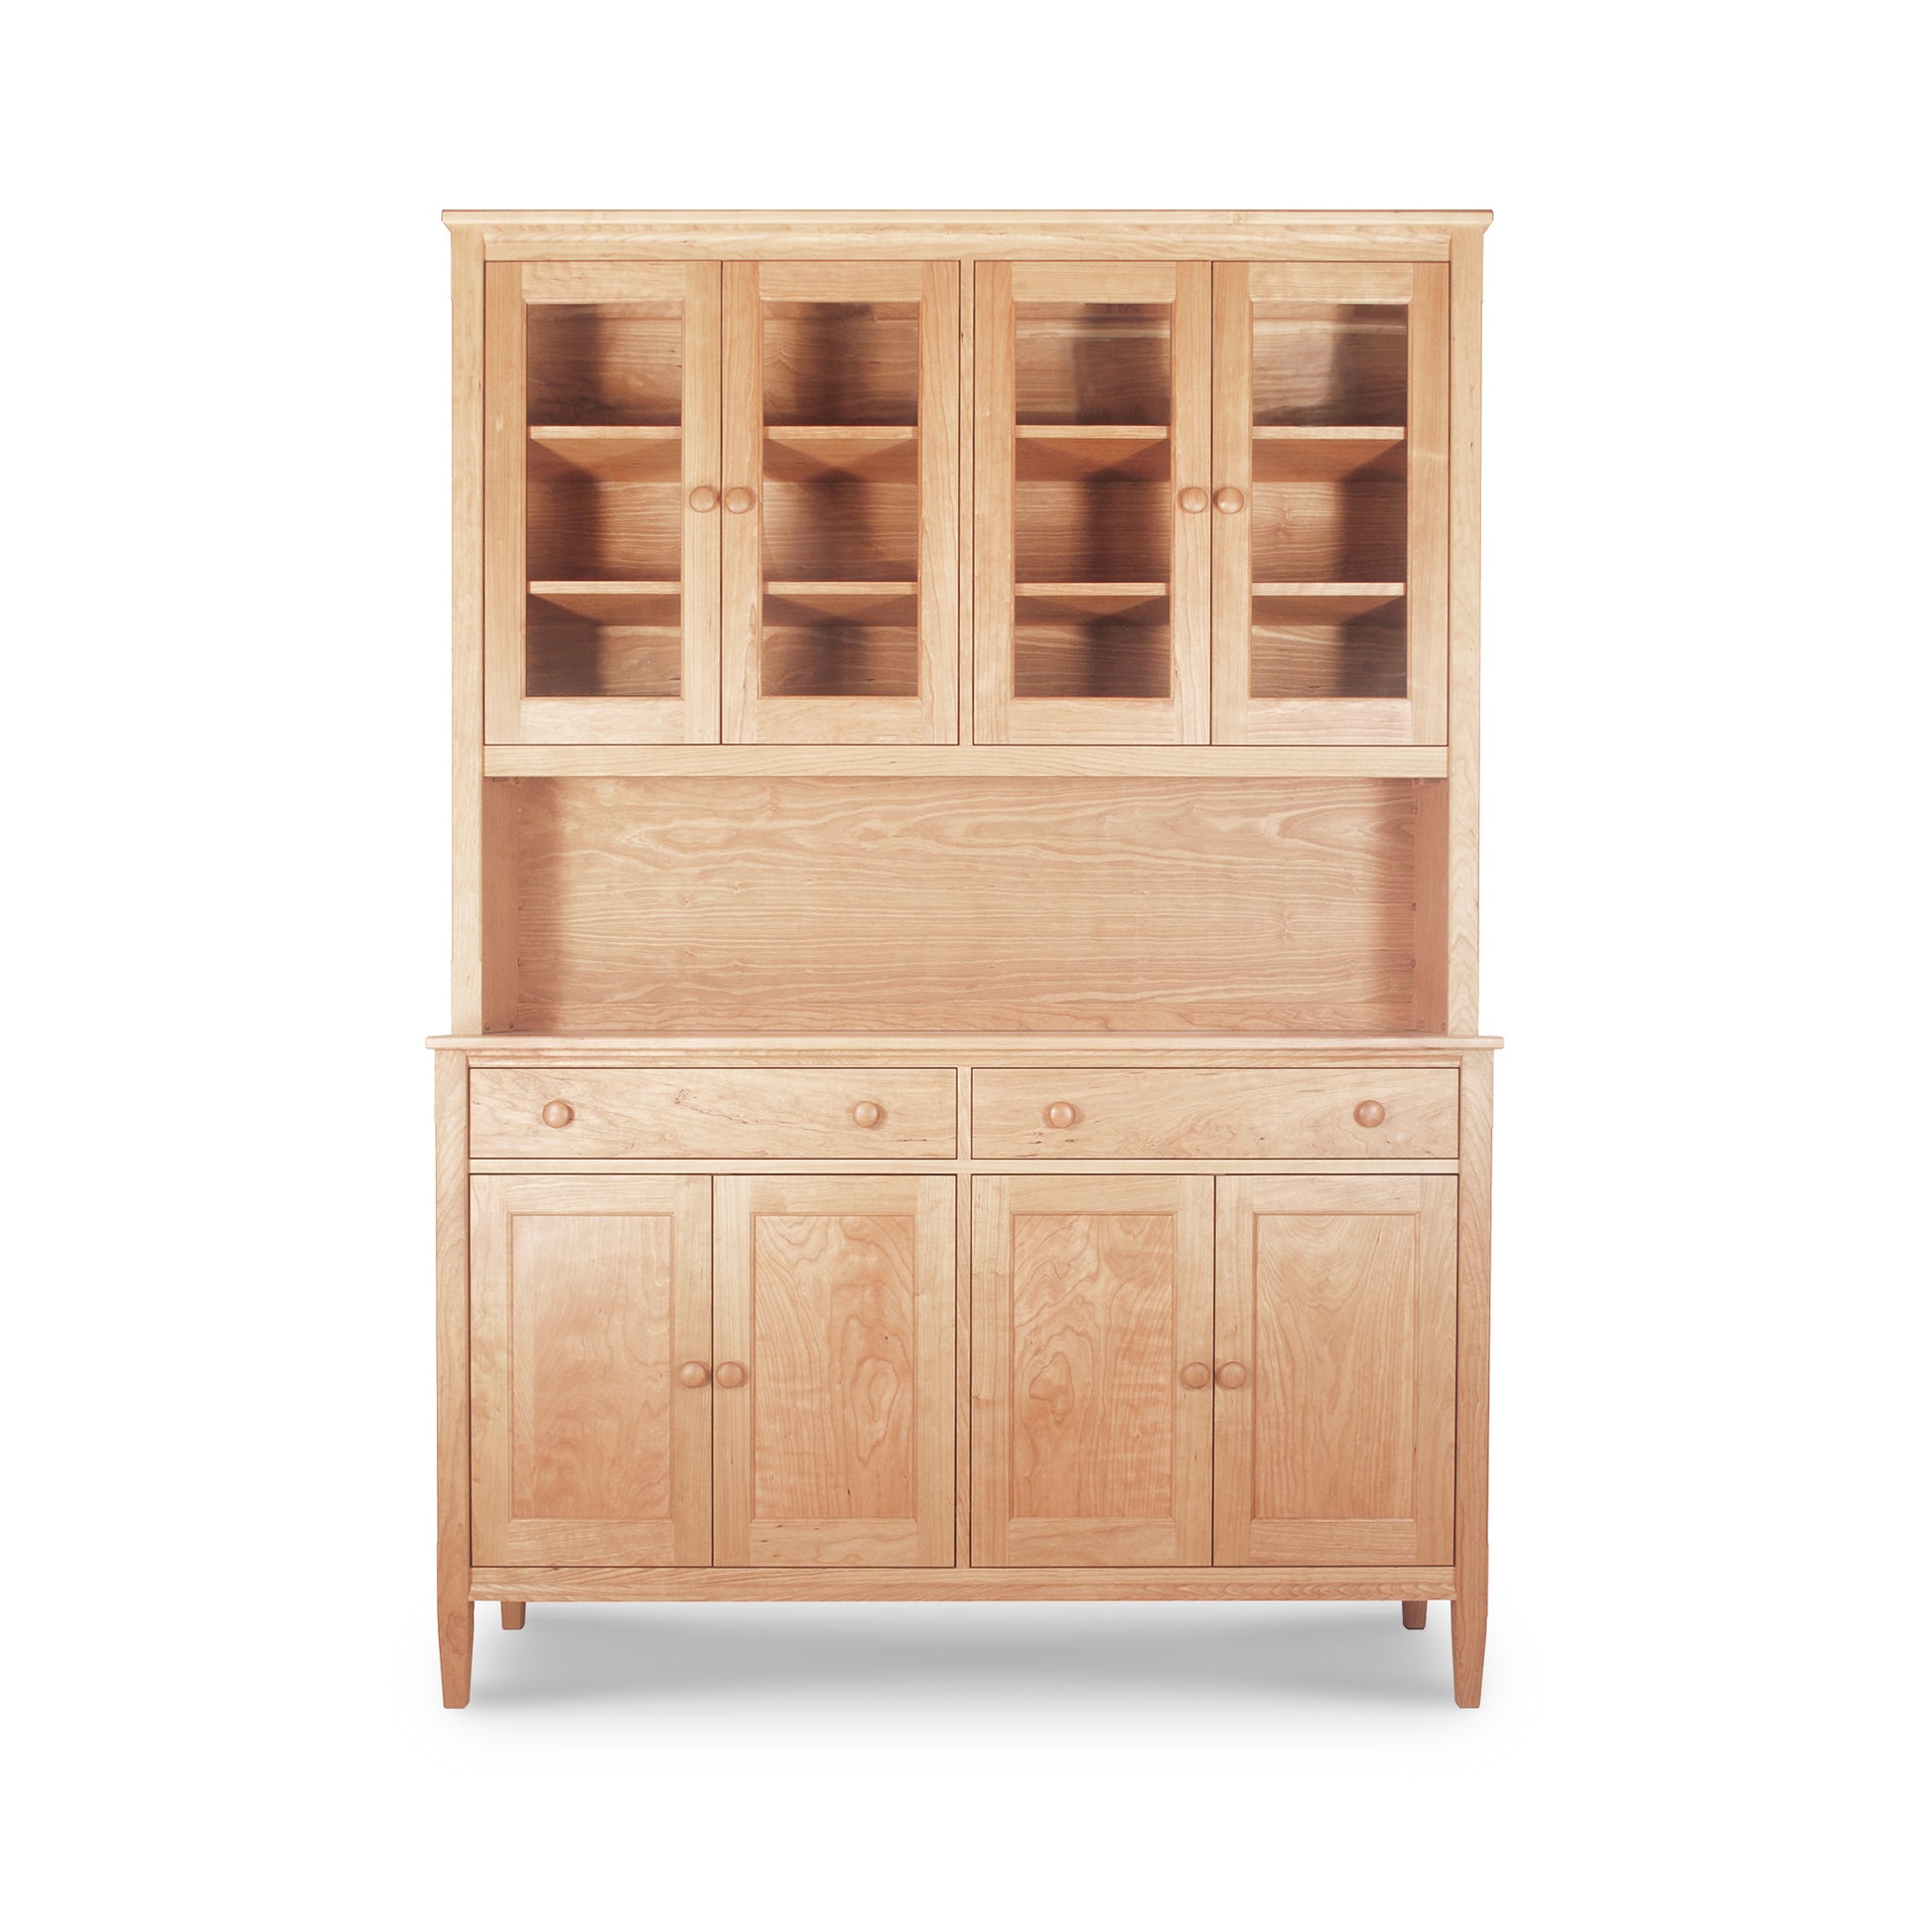 Solid natural cherry Maple Corner Woodworks Vermont Shaker Large China Cabinet with upper adjustable shelves and lower cabinets and drawers, isolated on a white background.